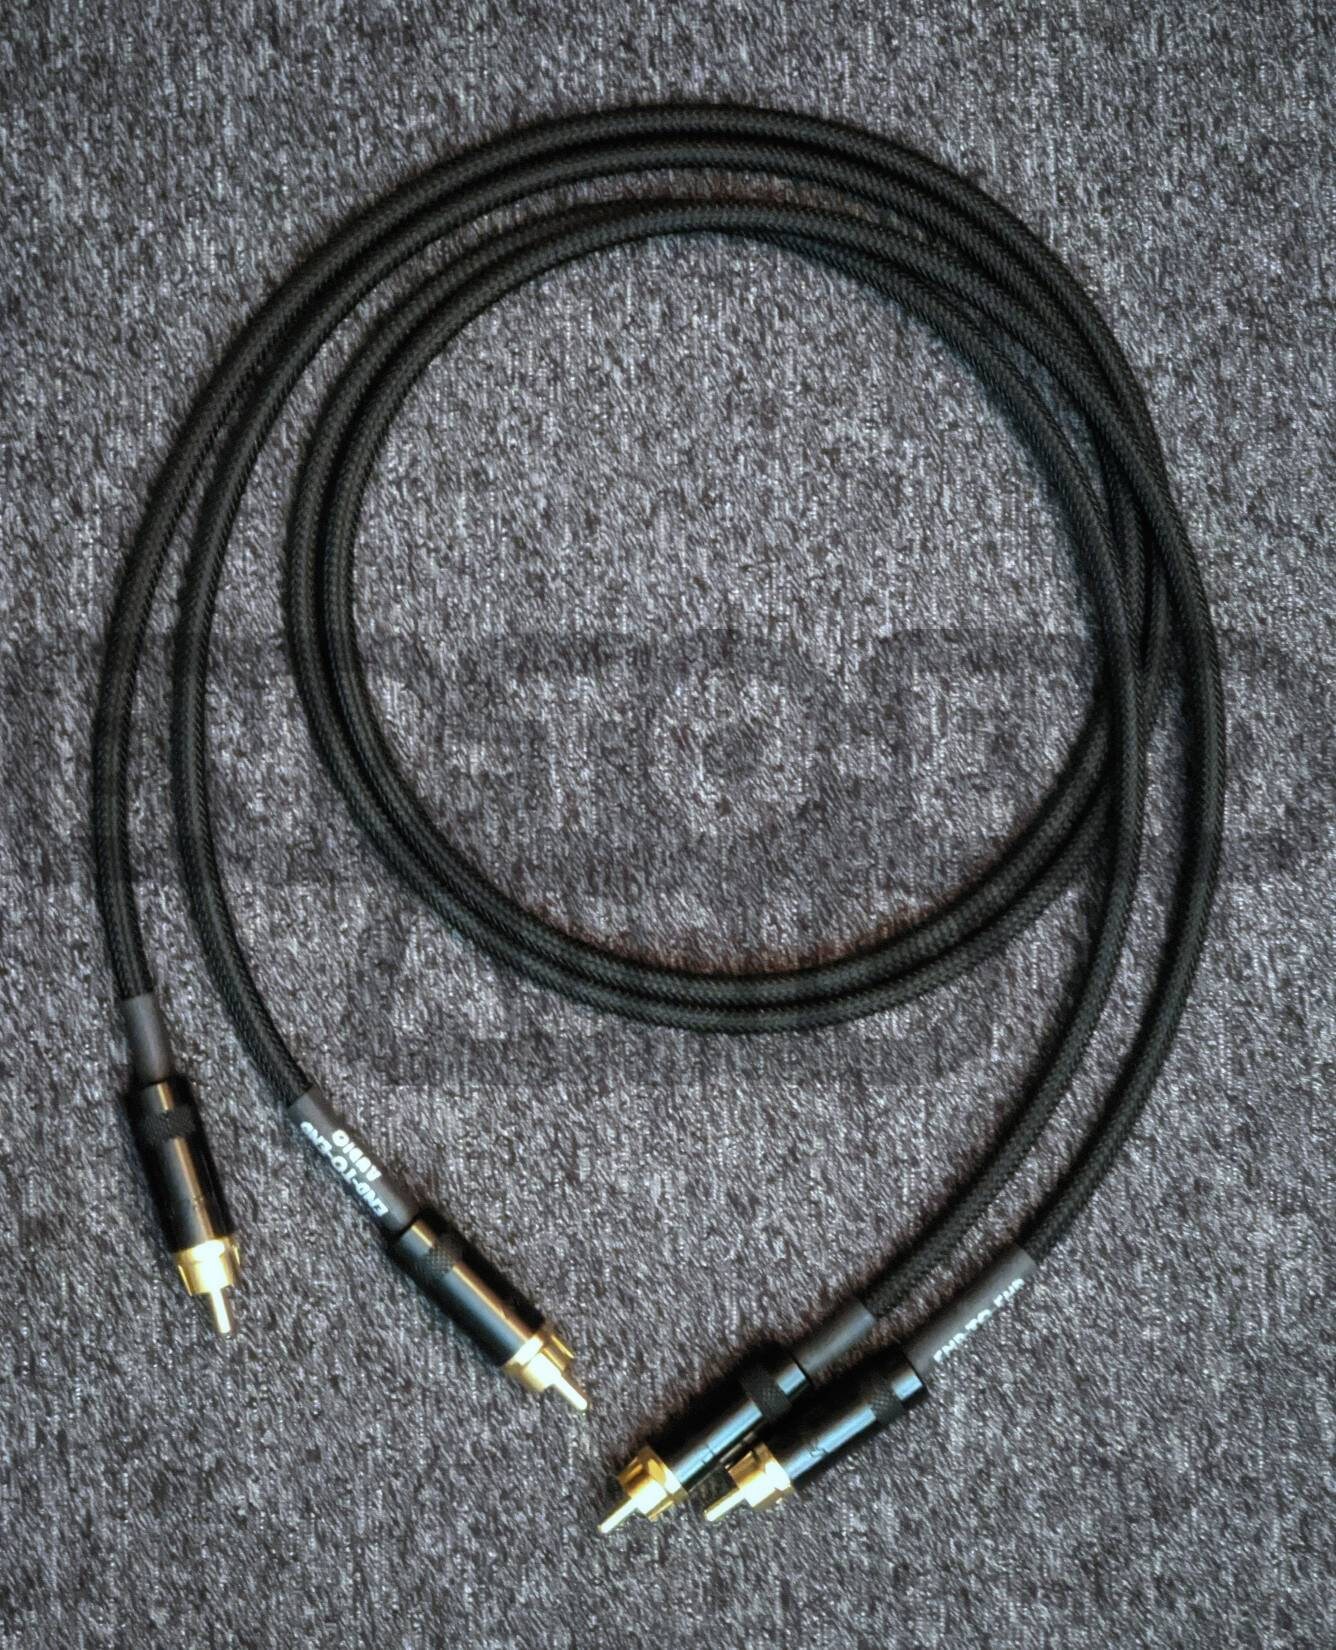 Audio Interconnect Cable Pair Custom Made by WORLDS BEST CABLES Using Mogami 2964 Wire and Neutrik-Rean NYS Gold RCA Connectors 4 Foot